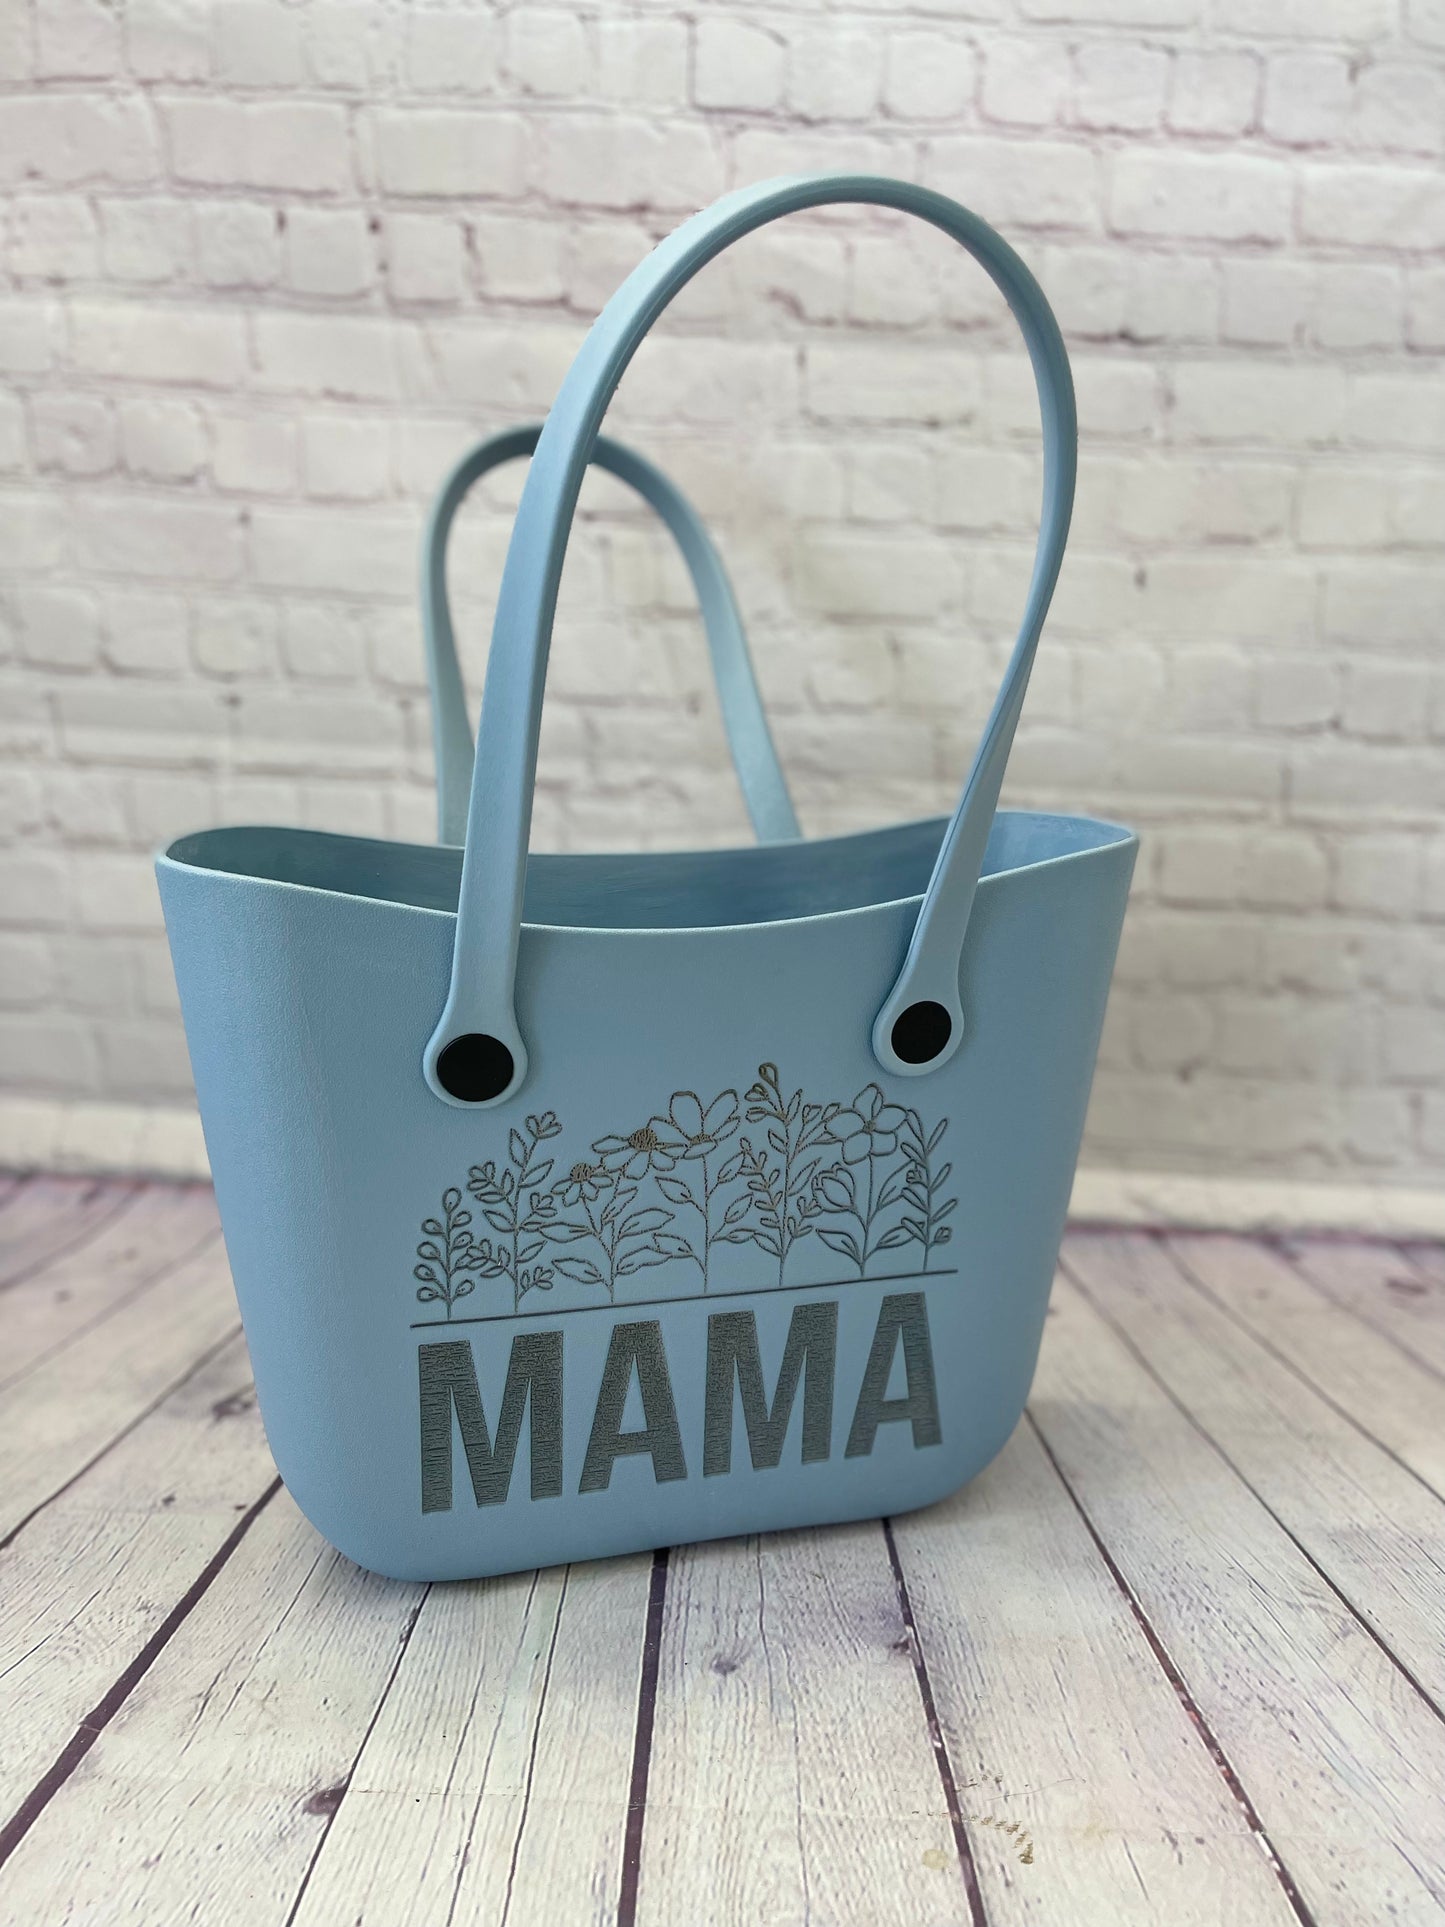 Mama Tote Bag | Personalized Grandparent Gift | Personalized Mothers Day Gift | Personalized Tote Bag | Personalized Beach Bag